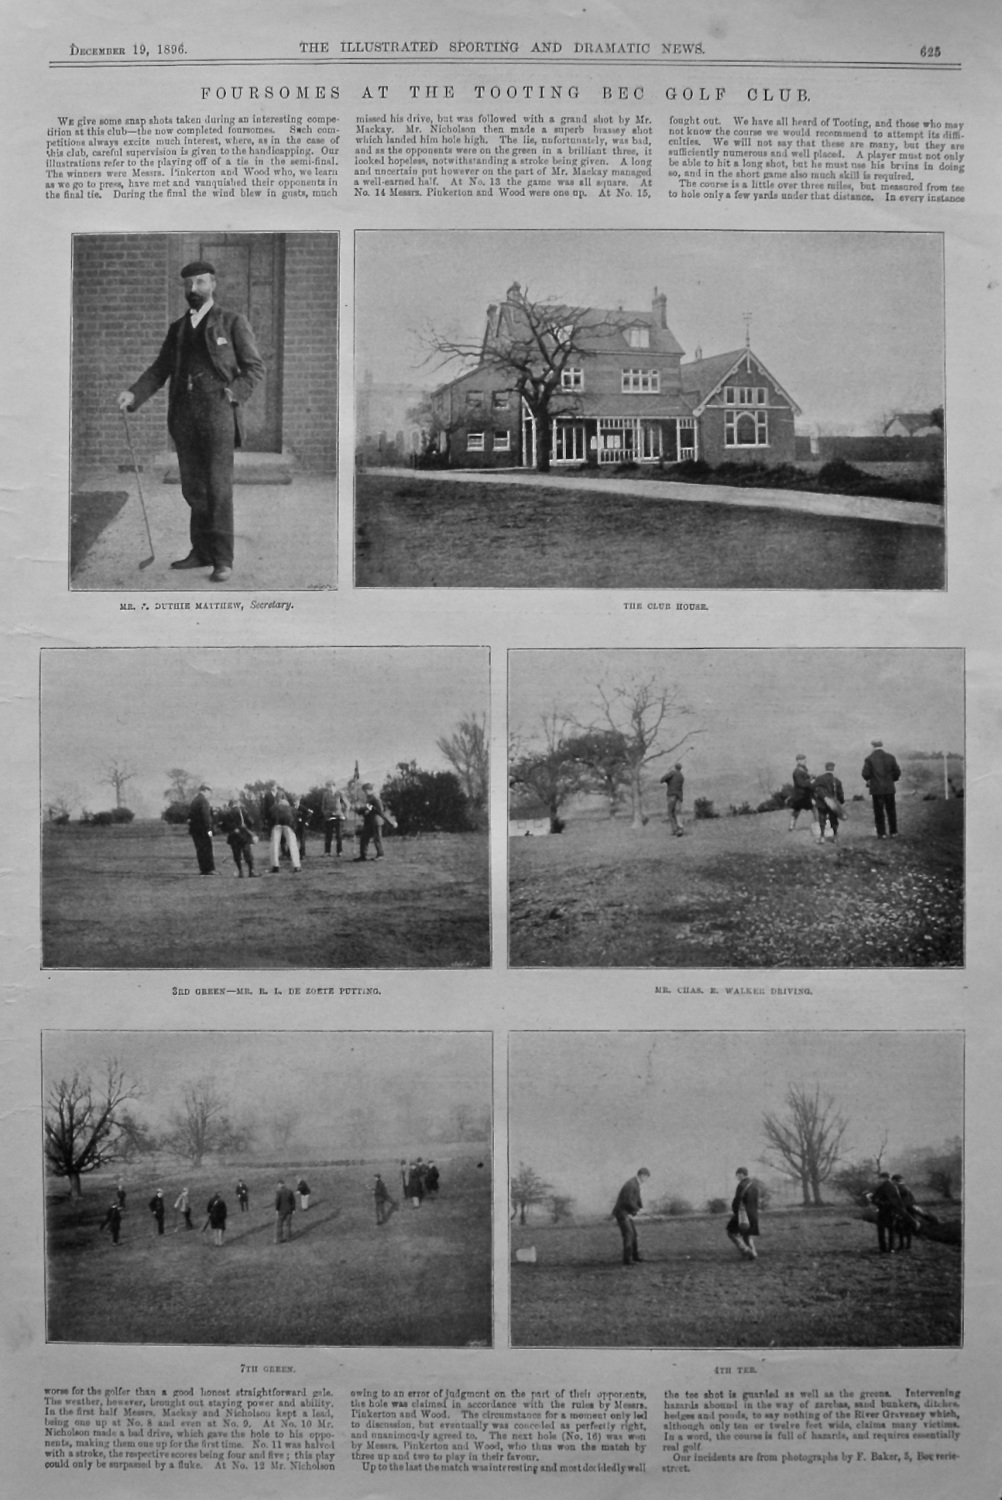 Foursomes at the Tooting Bec Golf Club. 1896.